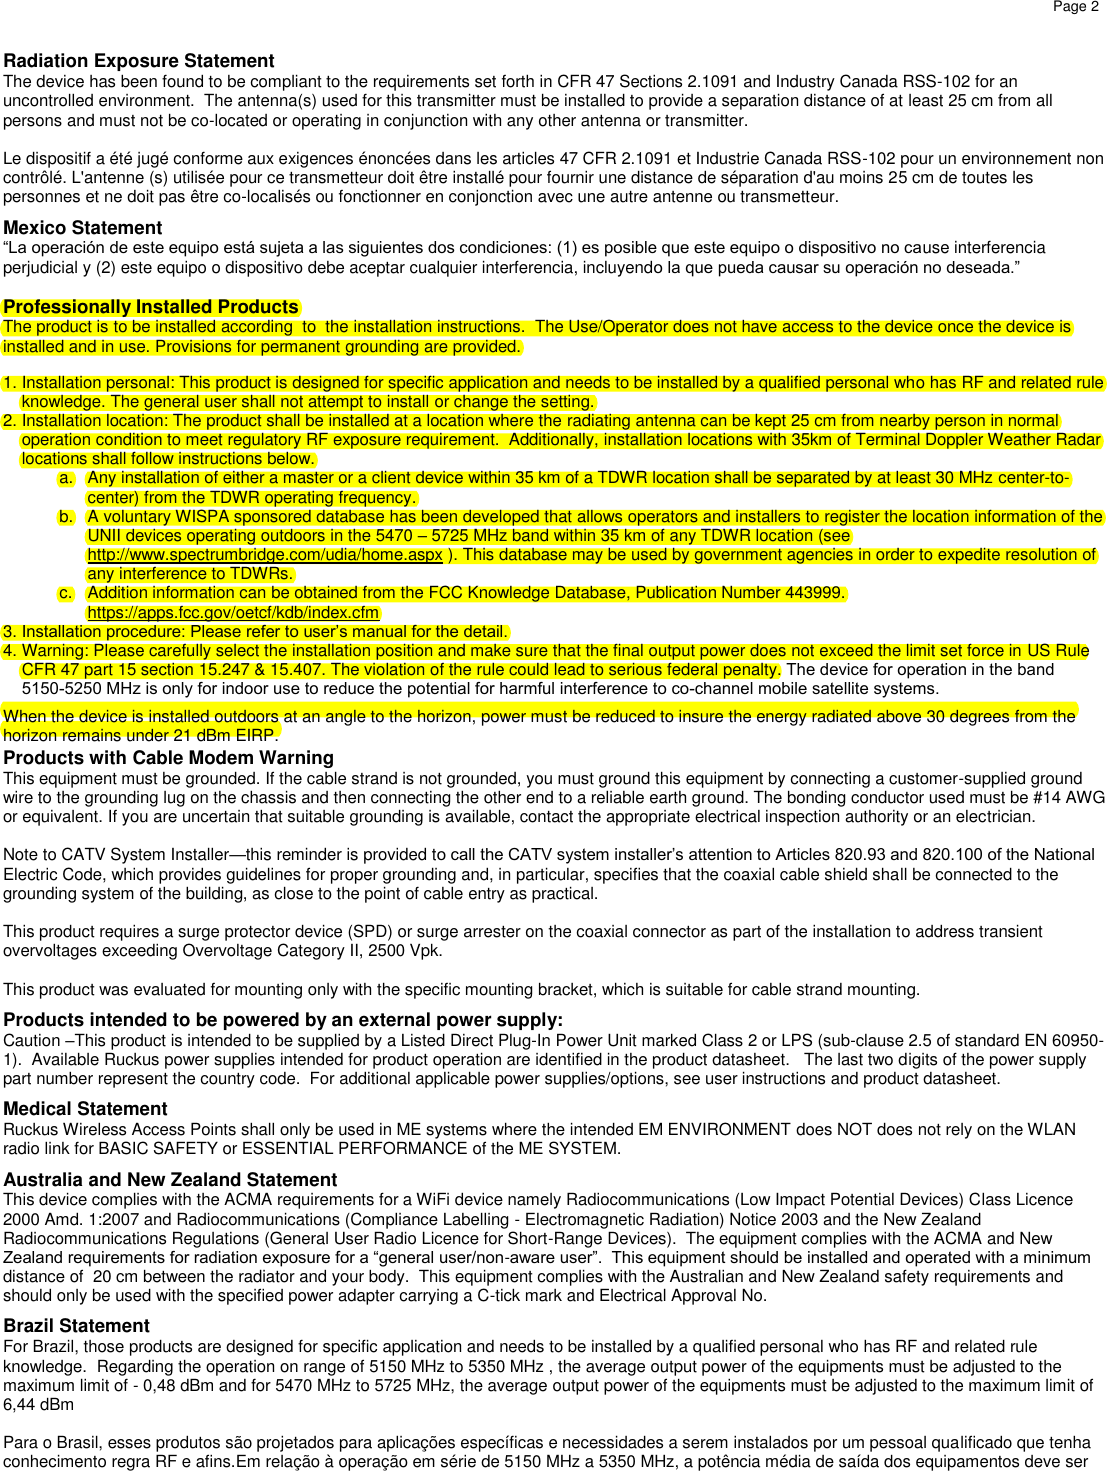 Page 2 Radiation Exposure Statement The device has been found to be compliant to the requirements set forth in CFR 47 Sections 2.1091 and Industry Canada RSS-102 for an uncontrolled environment.  The antenna(s) used for this transmitter must be installed to provide a separation distance of at least 25 cm from all persons and must not be co-located or operating in conjunction with any other antenna or transmitter.  Le dispositif a été jugé conforme aux exigences énoncées dans les articles 47 CFR 2.1091 et Industrie Canada RSS-102 pour un environnement non contrôlé. L&apos;antenne (s) utilisée pour ce transmetteur doit être installé pour fournir une distance de séparation d&apos;au moins 25 cm de toutes les personnes et ne doit pas être co-localisés ou fonctionner en conjonction avec une autre antenne ou transmetteur. Mexico Statement “La operación de este equipo está sujeta a las siguientes dos condiciones: (1) es posible que este equipo o dispositivo no cause interferencia perjudicial y (2) este equipo o dispositivo debe aceptar cualquier interferencia, incluyendo la que pueda causar su operación no deseada.” Professionally Installed Products The product is to be installed according  to  the installation instructions.  The Use/Operator does not have access to the device once the device is installed and in use. Provisions for permanent grounding are provided. 1. Installation personal: This product is designed for specific application and needs to be installed by a qualified personal who has RF and related ruleknowledge. The general user shall not attempt to install or change the setting.2. Installation location: The product shall be installed at a location where the radiating antenna can be kept 25 cm from nearby person in normaloperation condition to meet regulatory RF exposure requirement.  Additionally, installation locations with 35km of Terminal Doppler Weather Radarlocations shall follow instructions below.a. Any installation of either a master or a client device within 35 km of a TDWR location shall be separated by at least 30 MHz center-to-center) from the TDWR operating frequency.b. A voluntary WISPA sponsored database has been developed that allows operators and installers to register the location information of theUNII devices operating outdoors in the 5470 – 5725 MHz band within 35 km of any TDWR location (seehttp://www.spectrumbridge.com/udia/home.aspx ). This database may be used by government agencies in order to expedite resolution ofany interference to TDWRs. c. Addition information can be obtained from the FCC Knowledge Database, Publication Number 443999.https://apps.fcc.gov/oetcf/kdb/index.cfm3. Installation procedure: Please refer to user’s manual for the detail.4. Warning: Please carefully select the installation position and make sure that the final output power does not exceed the limit set force in US Rule CFR 47 part 15 section 15.247 &amp; 15.407. The violation of the rule could lead to serious federal penalty. The device for operation in the band 5150-5250 MHz is only for indoor use to reduce the potential for harmful interference to co-channel mobile satellite systems.When the device is installed outdoors at an angle to the horizon, power must be reduced to insure the energy radiated above 30 degrees from the horizon remains under 21 dBm EIRP. Products with Cable Modem Warning This equipment must be grounded. If the cable strand is not grounded, you must ground this equipment by connecting a customer-supplied ground wire to the grounding lug on the chassis and then connecting the other end to a reliable earth ground. The bonding conductor used must be #14 AWG or equivalent. If you are uncertain that suitable grounding is available, contact the appropriate electrical inspection authority or an electrician. Note to CATV System Installer—this reminder is provided to call the CATV system installer’s attention to Articles 820.93 and 820.100 of the National Electric Code, which provides guidelines for proper grounding and, in particular, specifies that the coaxial cable shield shall be connected to the grounding system of the building, as close to the point of cable entry as practical. This product requires a surge protector device (SPD) or surge arrester on the coaxial connector as part of the installation to address transient overvoltages exceeding Overvoltage Category II, 2500 Vpk. This product was evaluated for mounting only with the specific mounting bracket, which is suitable for cable strand mounting. Products intended to be powered by an external power supply: Caution –This product is intended to be supplied by a Listed Direct Plug-In Power Unit marked Class 2 or LPS (sub-clause 2.5 of standard EN 60950-1).  Available Ruckus power supplies intended for product operation are identified in the product datasheet.   The last two digits of the power supply part number represent the country code.  For additional applicable power supplies/options, see user instructions and product datasheet. Medical Statement Ruckus Wireless Access Points shall only be used in ME systems where the intended EM ENVIRONMENT does NOT does not rely on the WLAN radio link for BASIC SAFETY or ESSENTIAL PERFORMANCE of the ME SYSTEM. Australia and New Zealand Statement This device complies with the ACMA requirements for a WiFi device namely Radiocommunications (Low Impact Potential Devices) Class Licence 2000 Amd. 1:2007 and Radiocommunications (Compliance Labelling - Electromagnetic Radiation) Notice 2003 and the New Zealand Radiocommunications Regulations (General User Radio Licence for Short-Range Devices).  The equipment complies with the ACMA and New Zealand requirements for radiation exposure for a “general user/non-aware user”.  This equipment should be installed and operated with a minimum distance of  20 cm between the radiator and your body.  This equipment complies with the Australian and New Zealand safety requirements and should only be used with the specified power adapter carrying a C-tick mark and Electrical Approval No. Brazil Statement For Brazil, those products are designed for specific application and needs to be installed by a qualified personal who has RF and related rule knowledge.  Regarding the operation on range of 5150 MHz to 5350 MHz , the average output power of the equipments must be adjusted to the maximum limit of - 0,48 dBm and for 5470 MHz to 5725 MHz, the average output power of the equipments must be adjusted to the maximum limit of 6,44 dBm Para o Brasil, esses produtos são projetados para aplicações específicas e necessidades a serem instalados por um pessoal qualificado que tenha conhecimento regra RF e afins.Em relação à operação em série de 5150 MHz a 5350 MHz, a potência média de saída dos equipamentos deve ser 